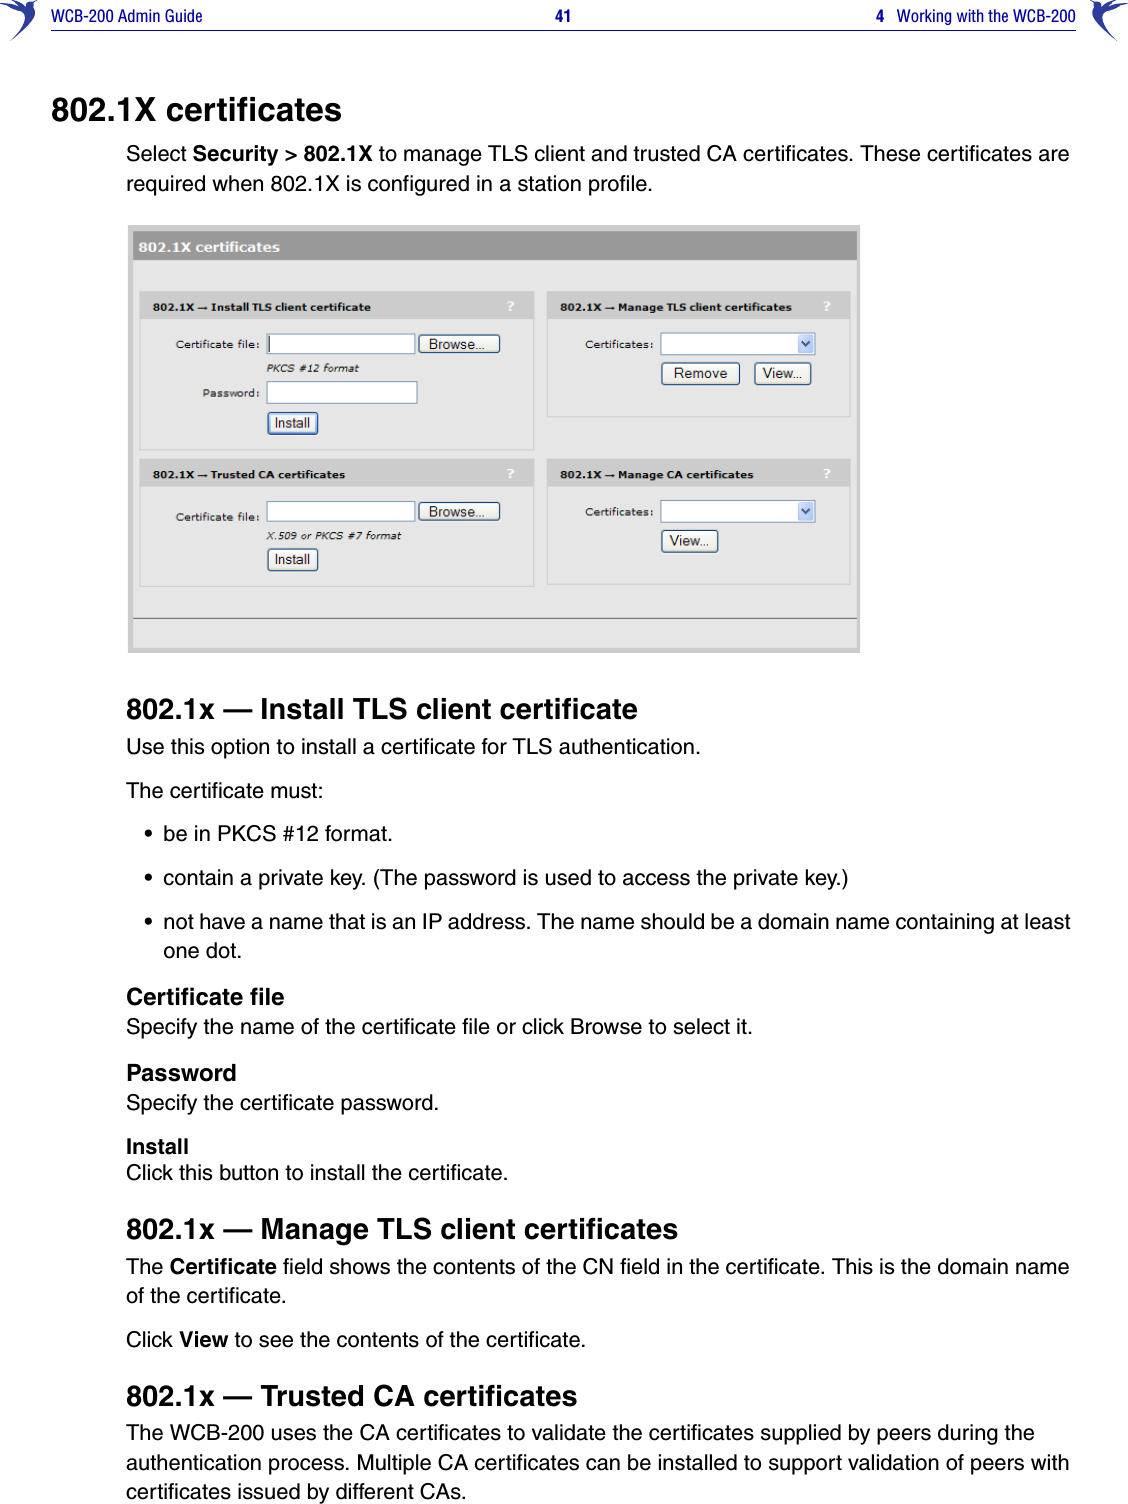 WCB-200 Admin Guide 41 4   Working with the WCB-200802.1X certificatesSelect Security &gt; 802.1X to manage TLS client and trusted CA certificates. These certificates are required when 802.1X is configured in a station profile.802.1x — Install TLS client certificateUse this option to install a certificate for TLS authentication.The certificate must:•be in PKCS #12 format. •contain a private key. (The password is used to access the private key.)•not have a name that is an IP address. The name should be a domain name containing at least one dot. Certificate fileSpecify the name of the certificate file or click Browse to select it.PasswordSpecify the certificate password.InstallClick this button to install the certificate.802.1x — Manage TLS client certificatesThe Certificate field shows the contents of the CN field in the certificate. This is the domain name of the certificate.Click View to see the contents of the certificate.802.1x — Trusted CA certificatesThe WCB-200 uses the CA certificates to validate the certificates supplied by peers during the authentication process. Multiple CA certificates can be installed to support validation of peers with certificates issued by different CAs.